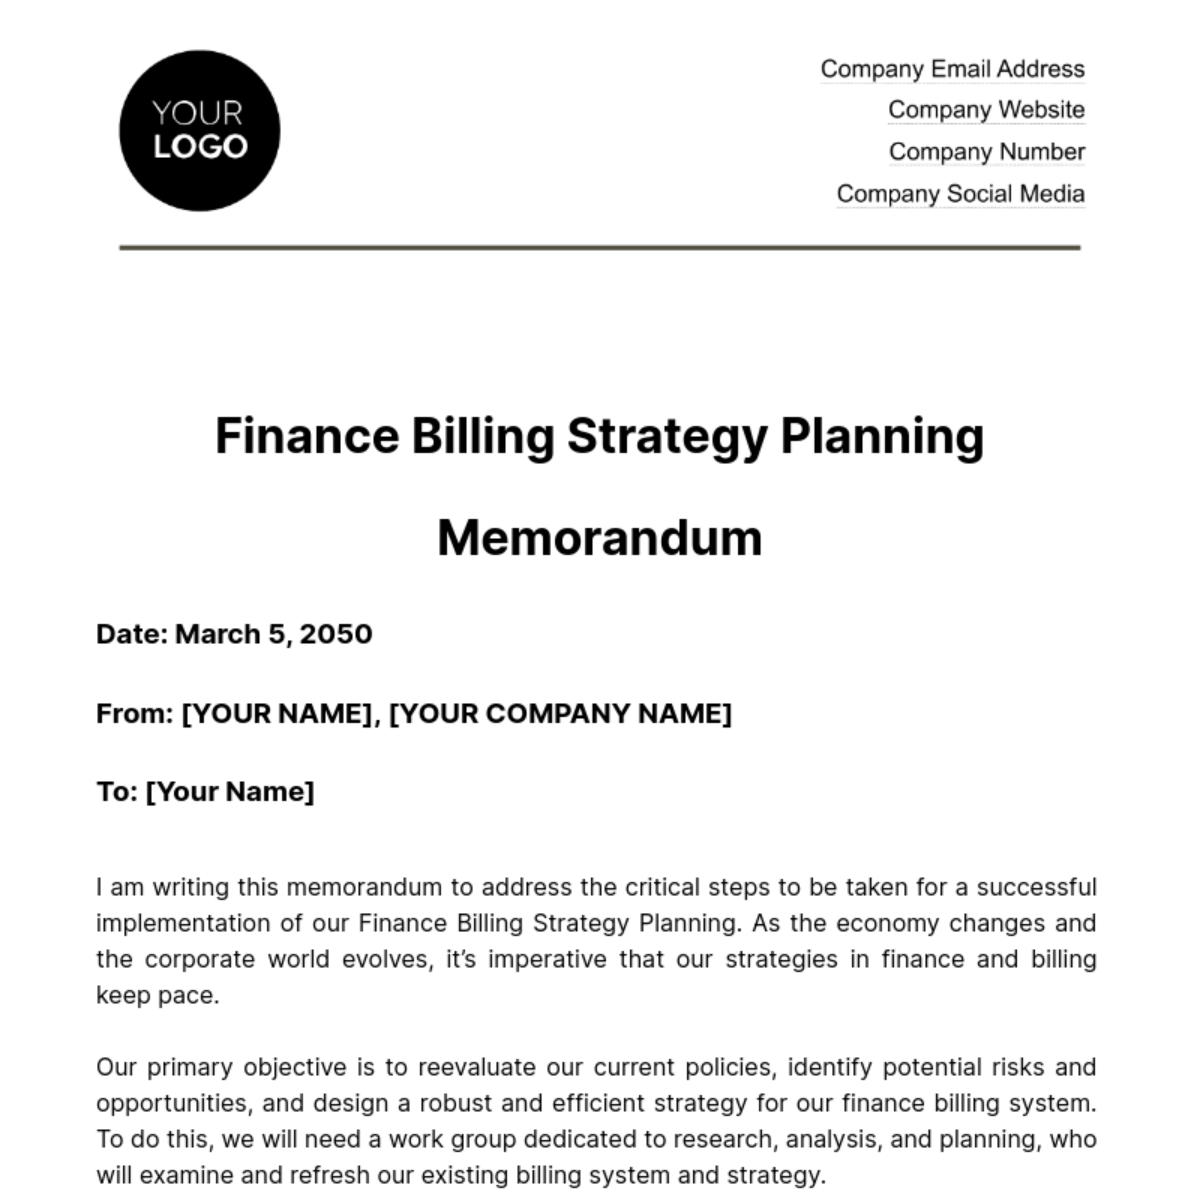 Free Finance Billing Strategy Planning Memo Template